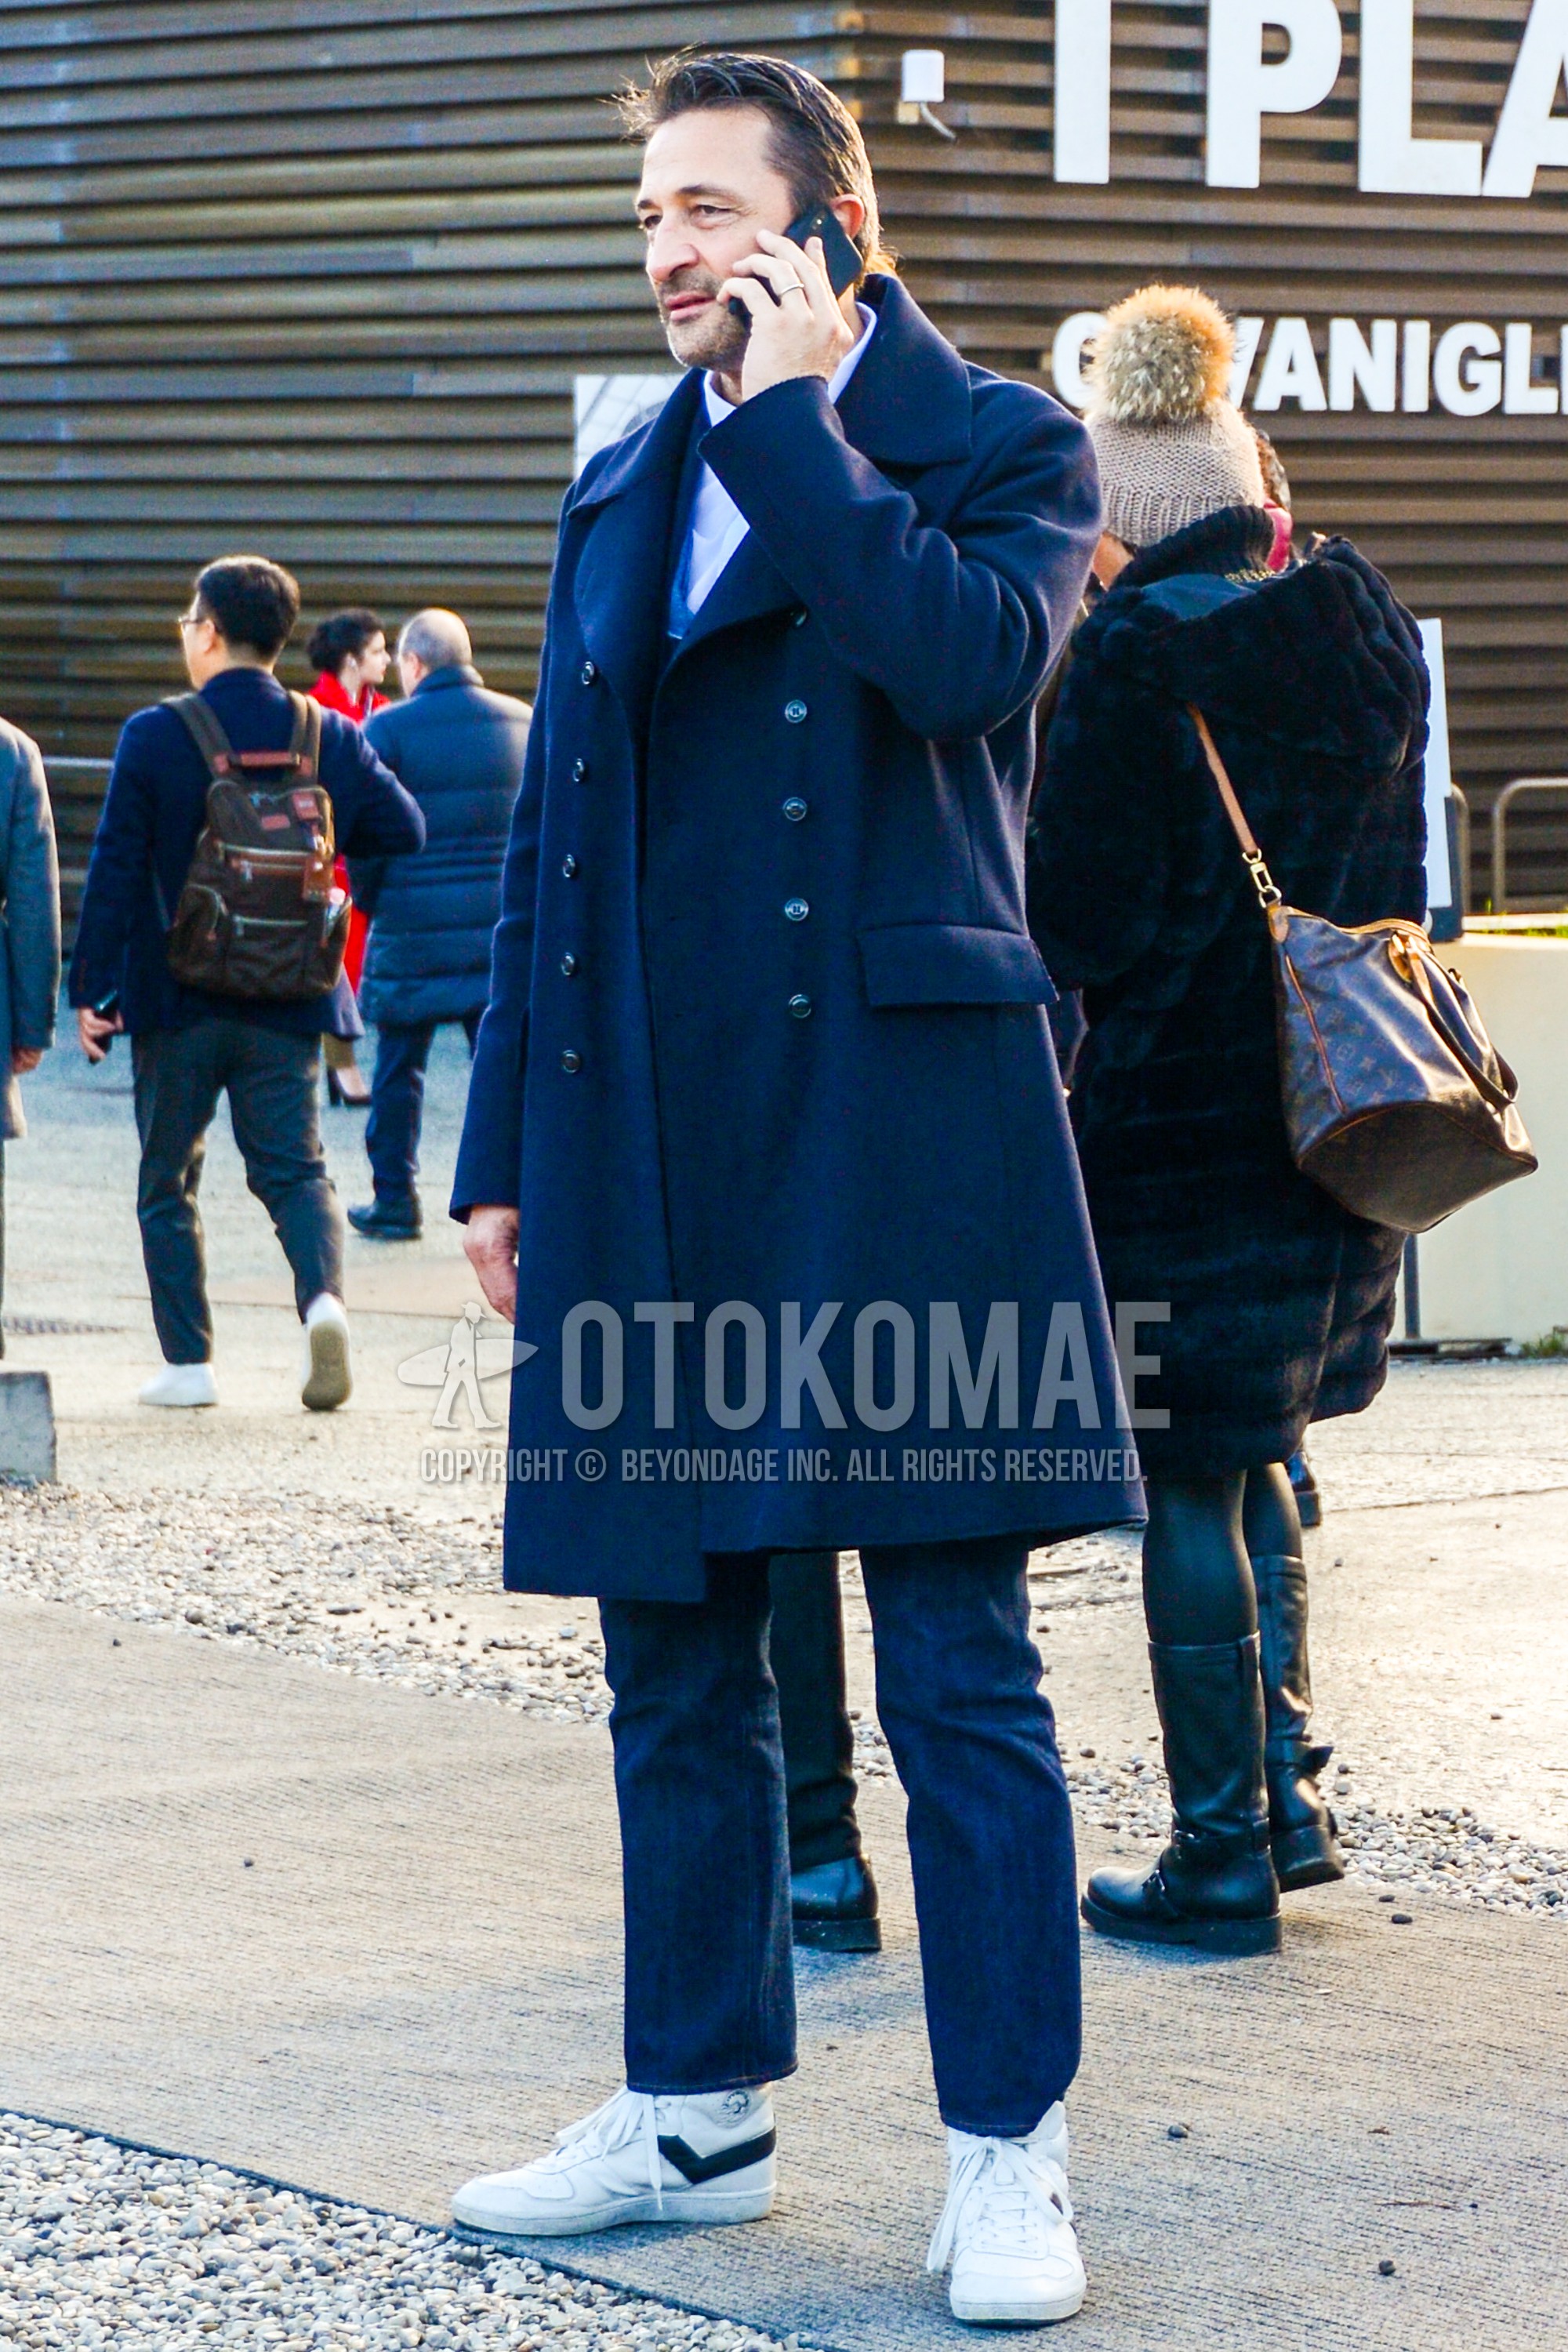 Men's winter outfit with navy plain ulster coat, white plain shirt, navy plain denim/jeans, white high-cut sneakers.